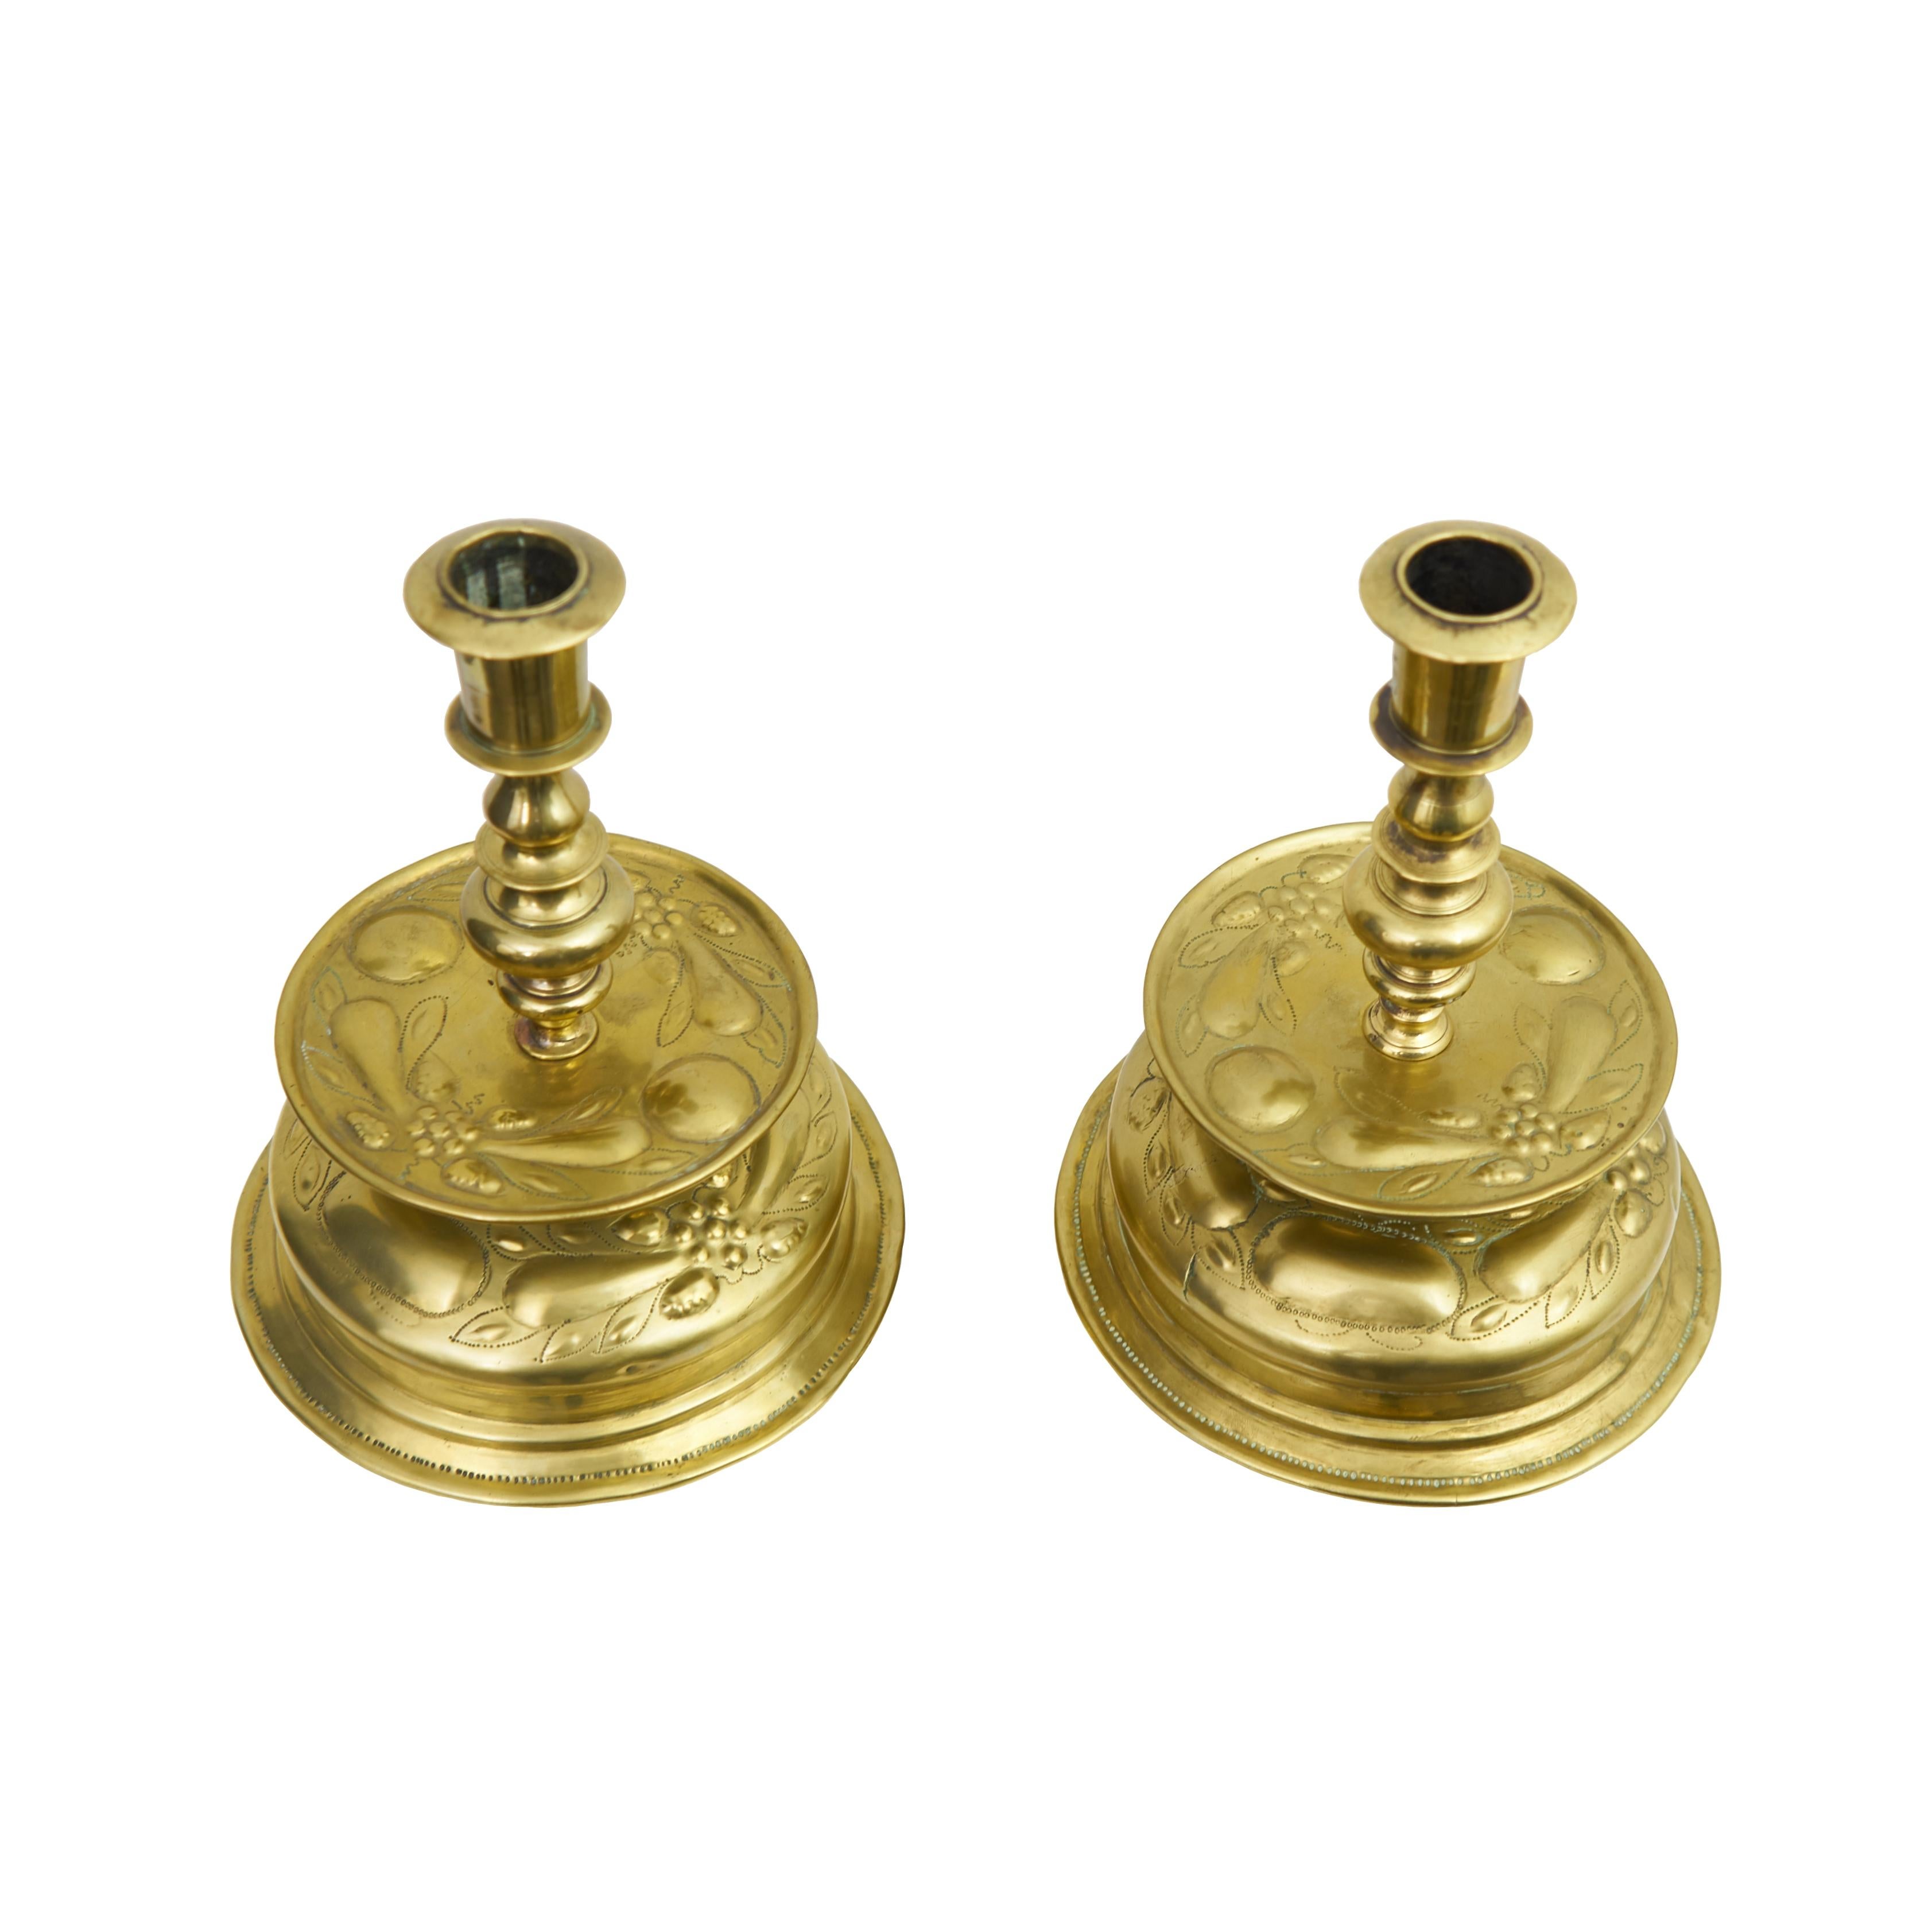 A matched pair of Dome base bell brass candlesticks. These rare Scandinavian candlesticks are 100% original, hand-driven and made of brass, decorated with flowers and grape motifs.
   